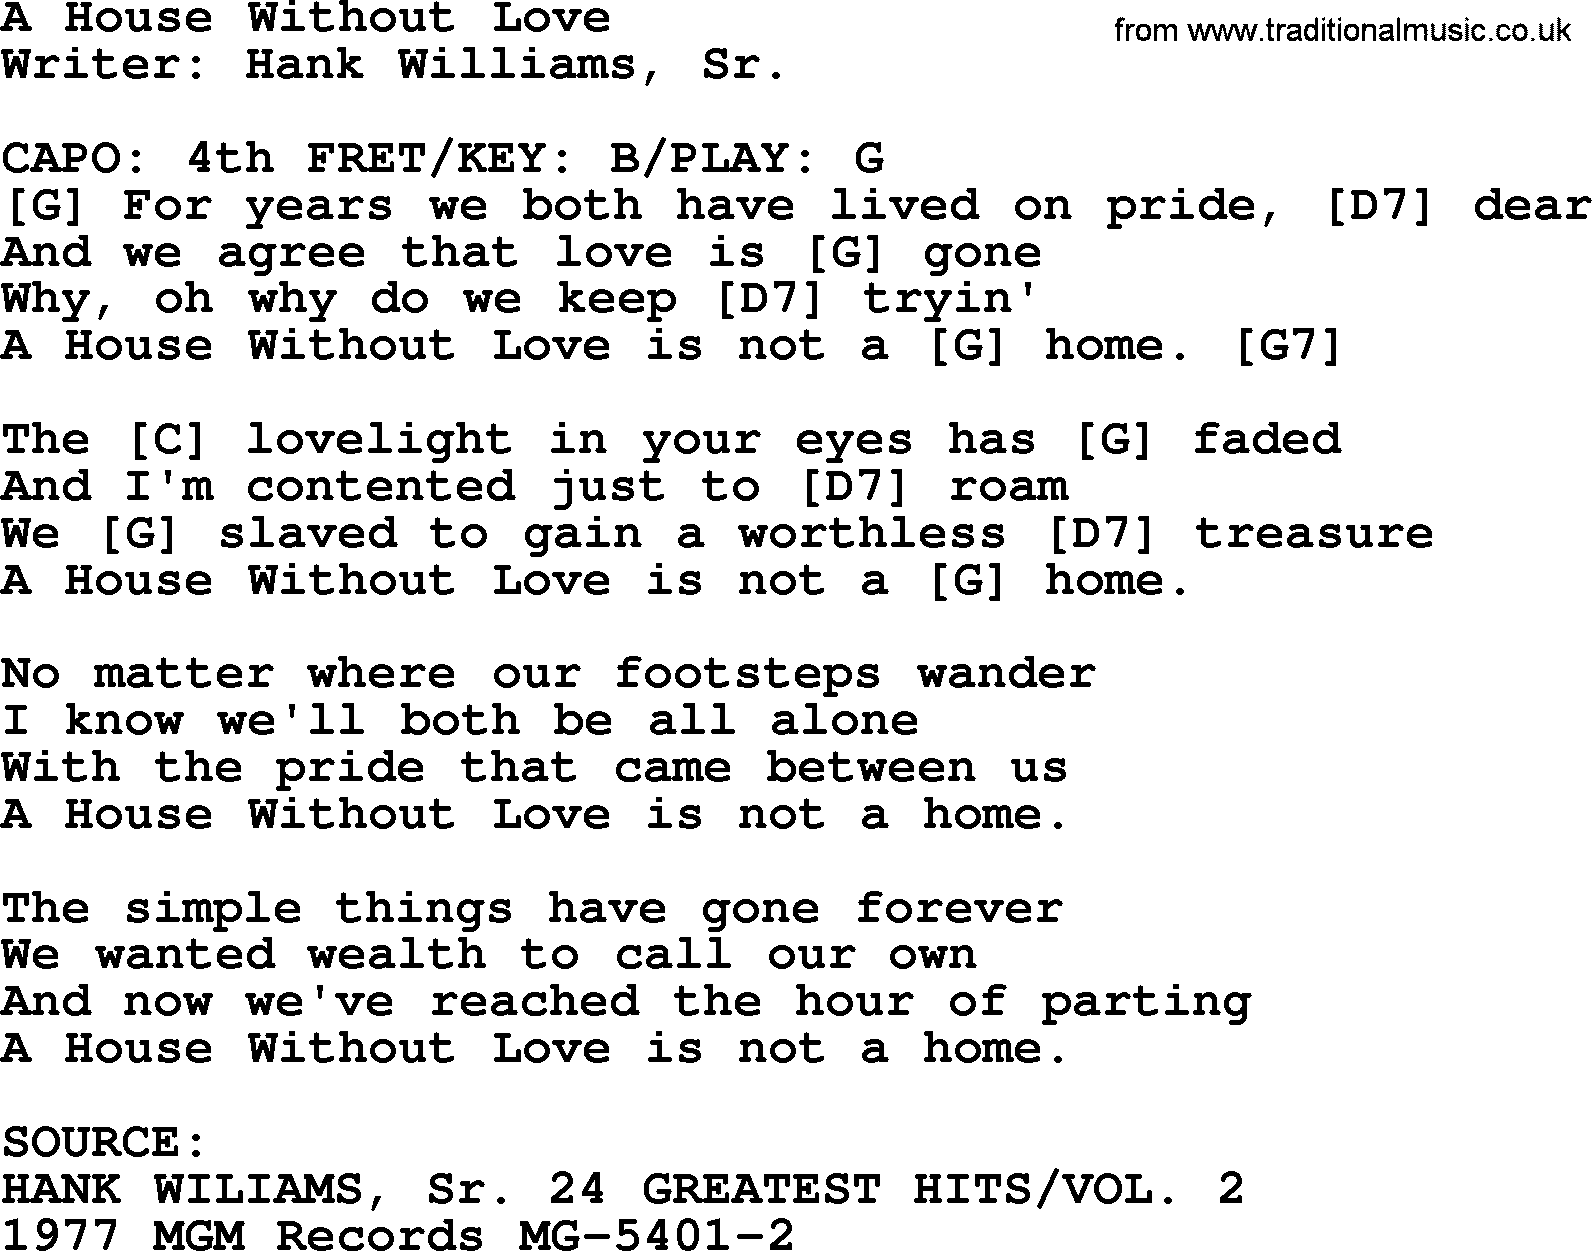 Hank Williams song A House Without Love, lyrics and chords